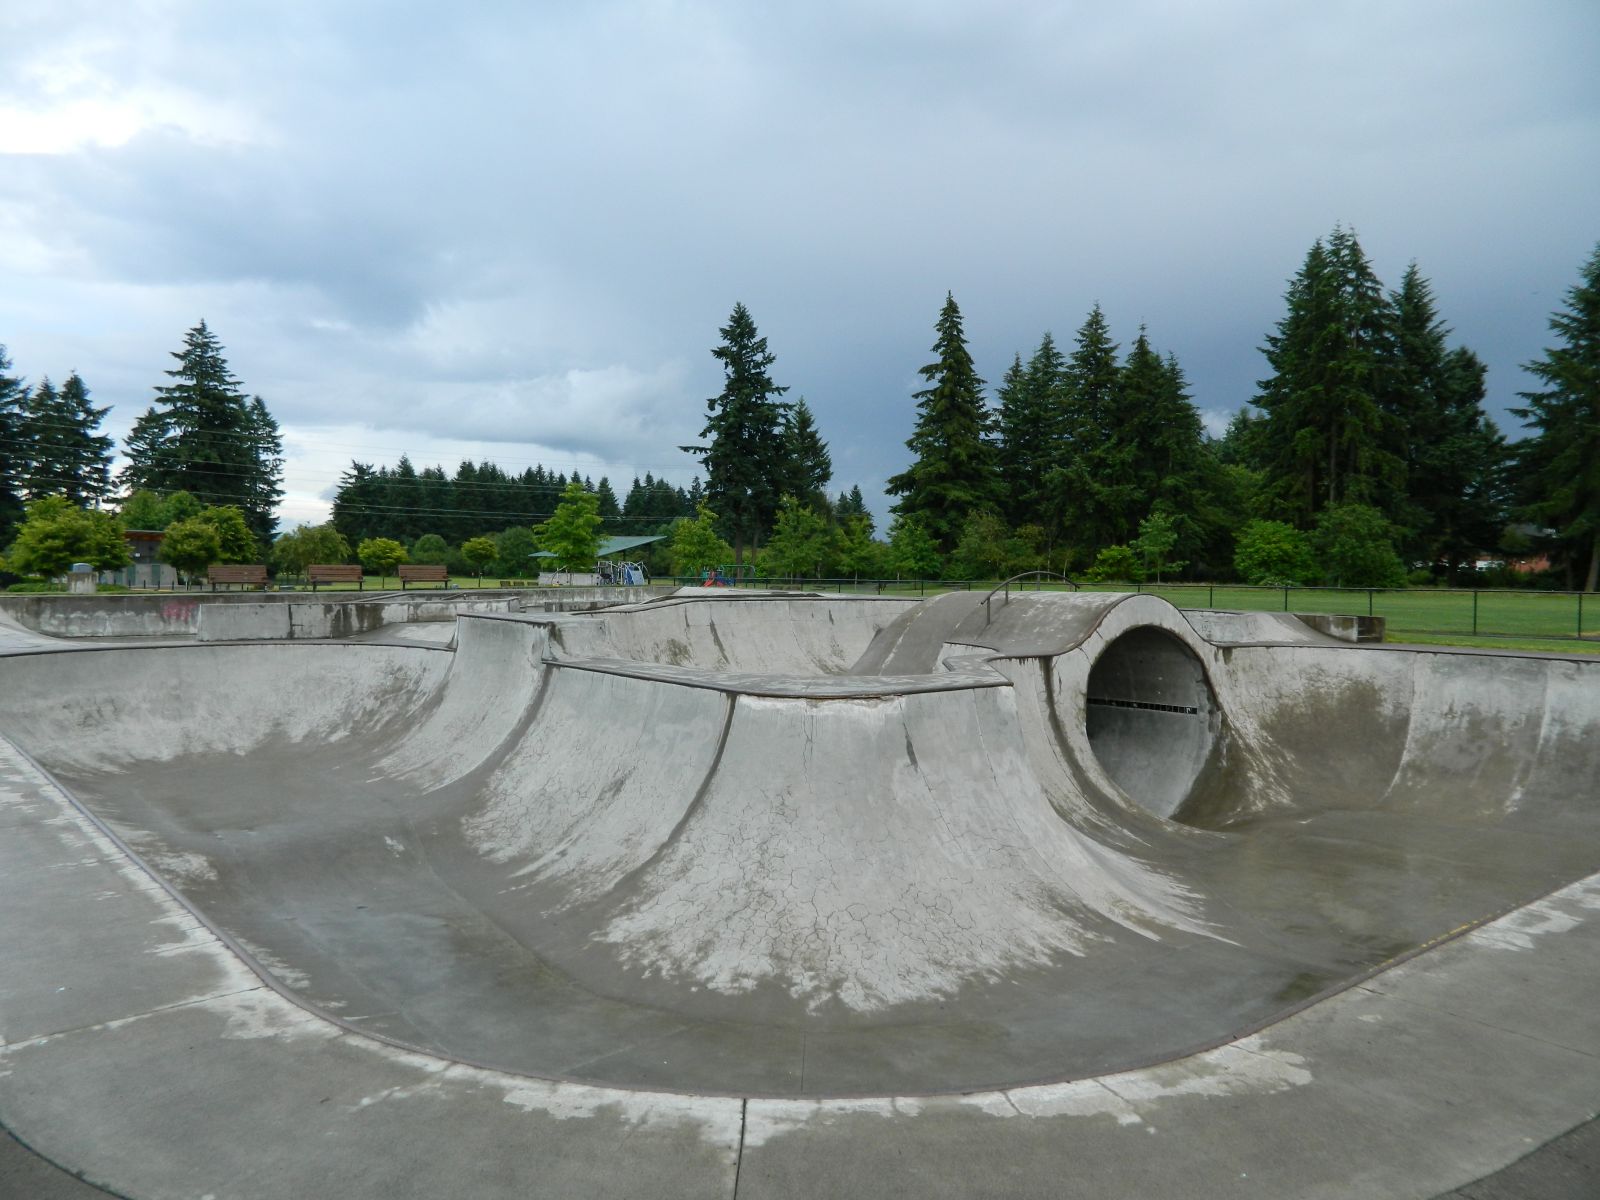 Pacific Community Park's Extreme Sports Area